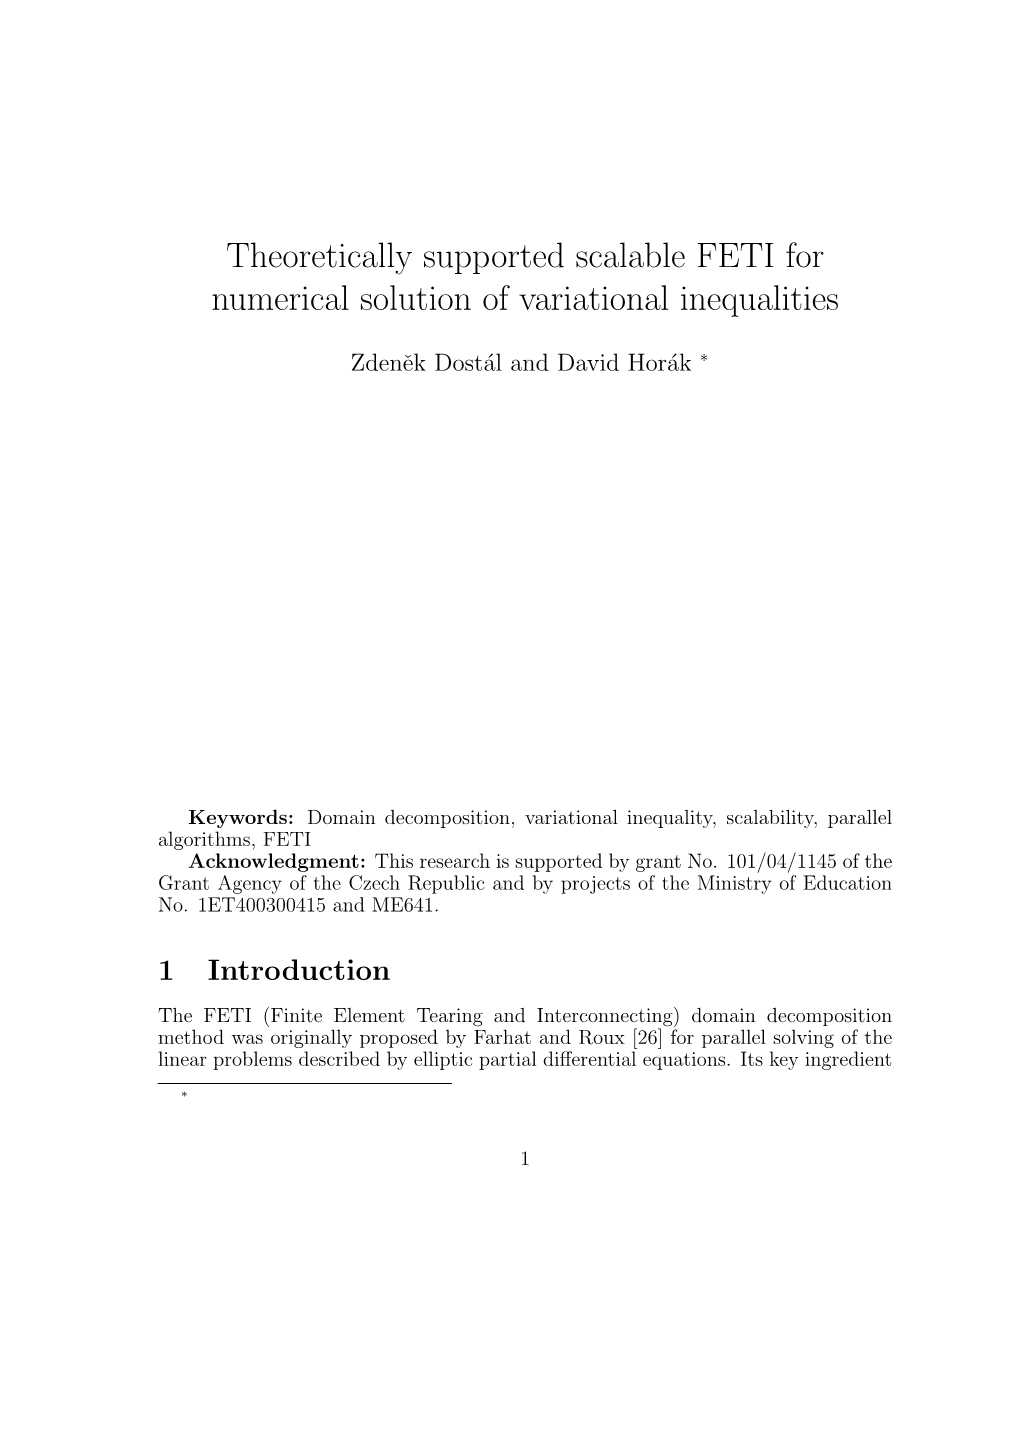 Theoretically Supported Scalable FETI for Numerical Solution of Variational Inequalities